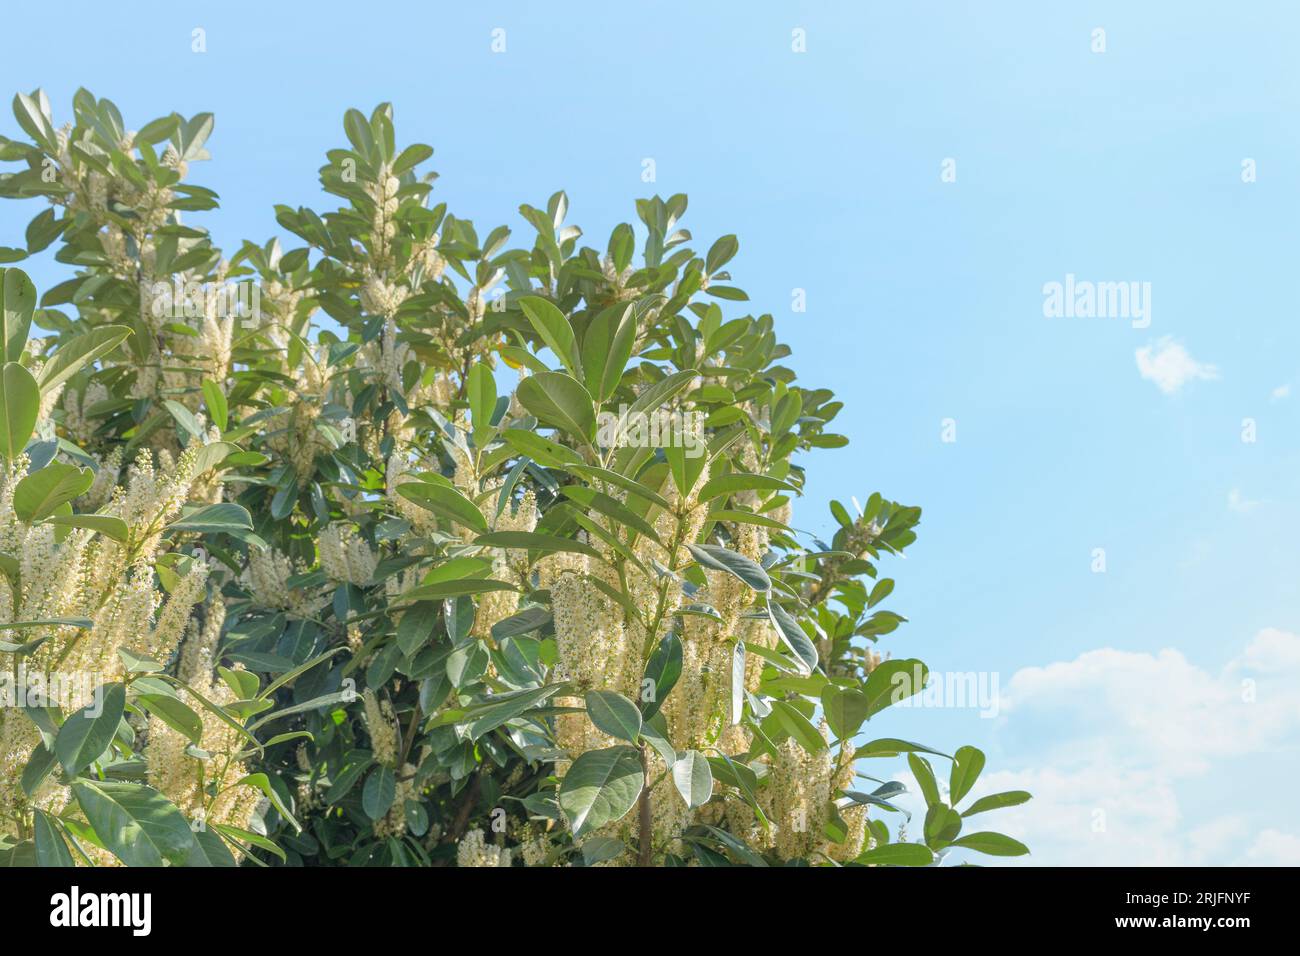 Cherry laurel - Prunus laurocerasus, is a green shrub with white blossoms in the spring. Stock Photo